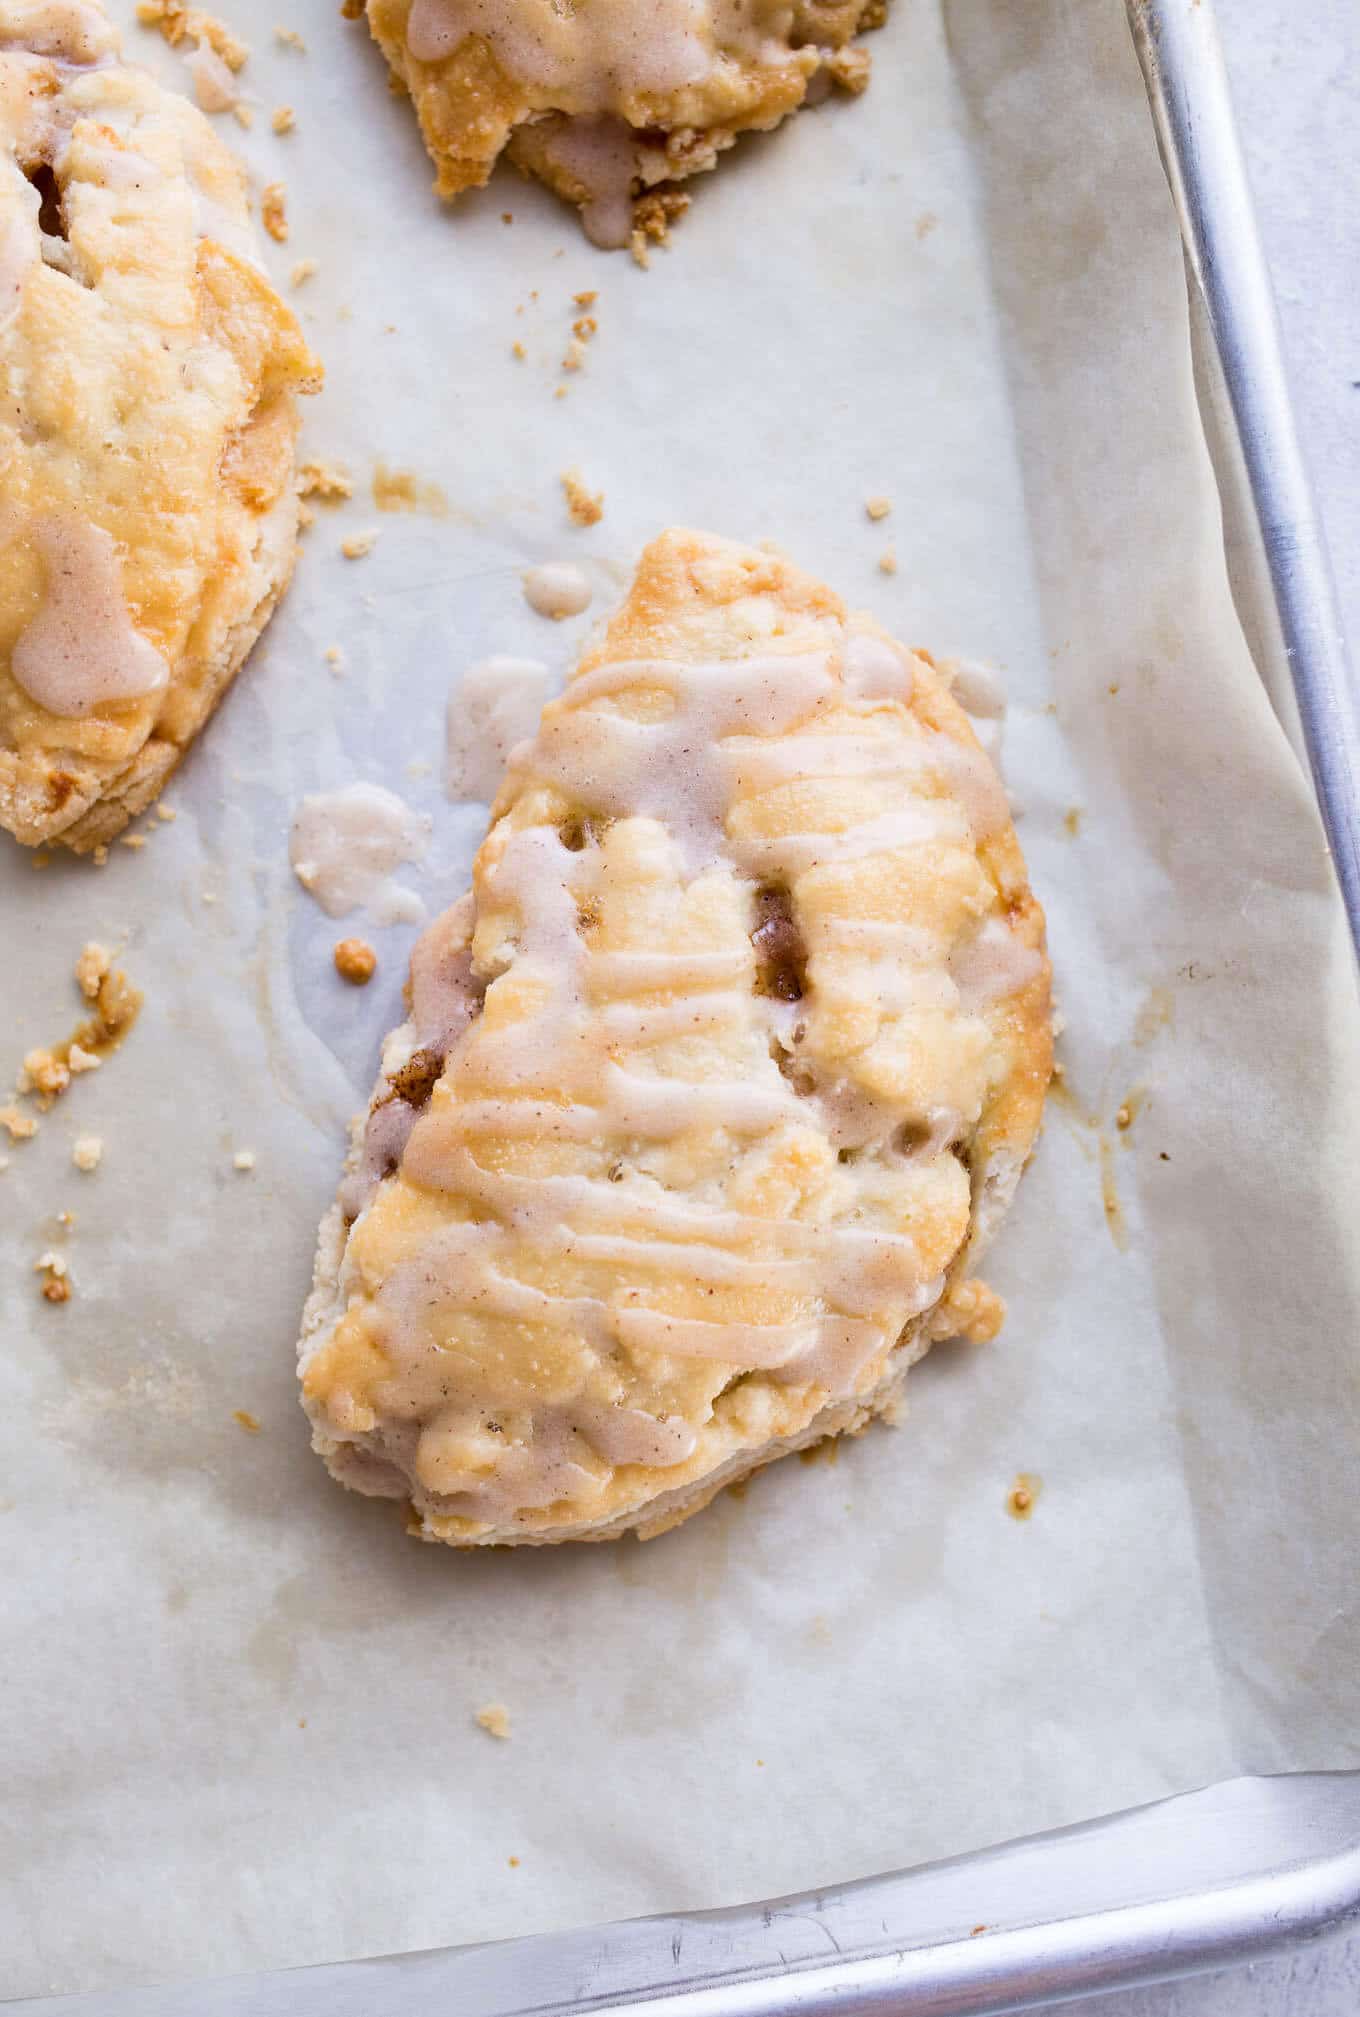 Gluten-Free Apple Hand Pies stuffed with cinnamon apples. Gluten-free and dairy-free. 